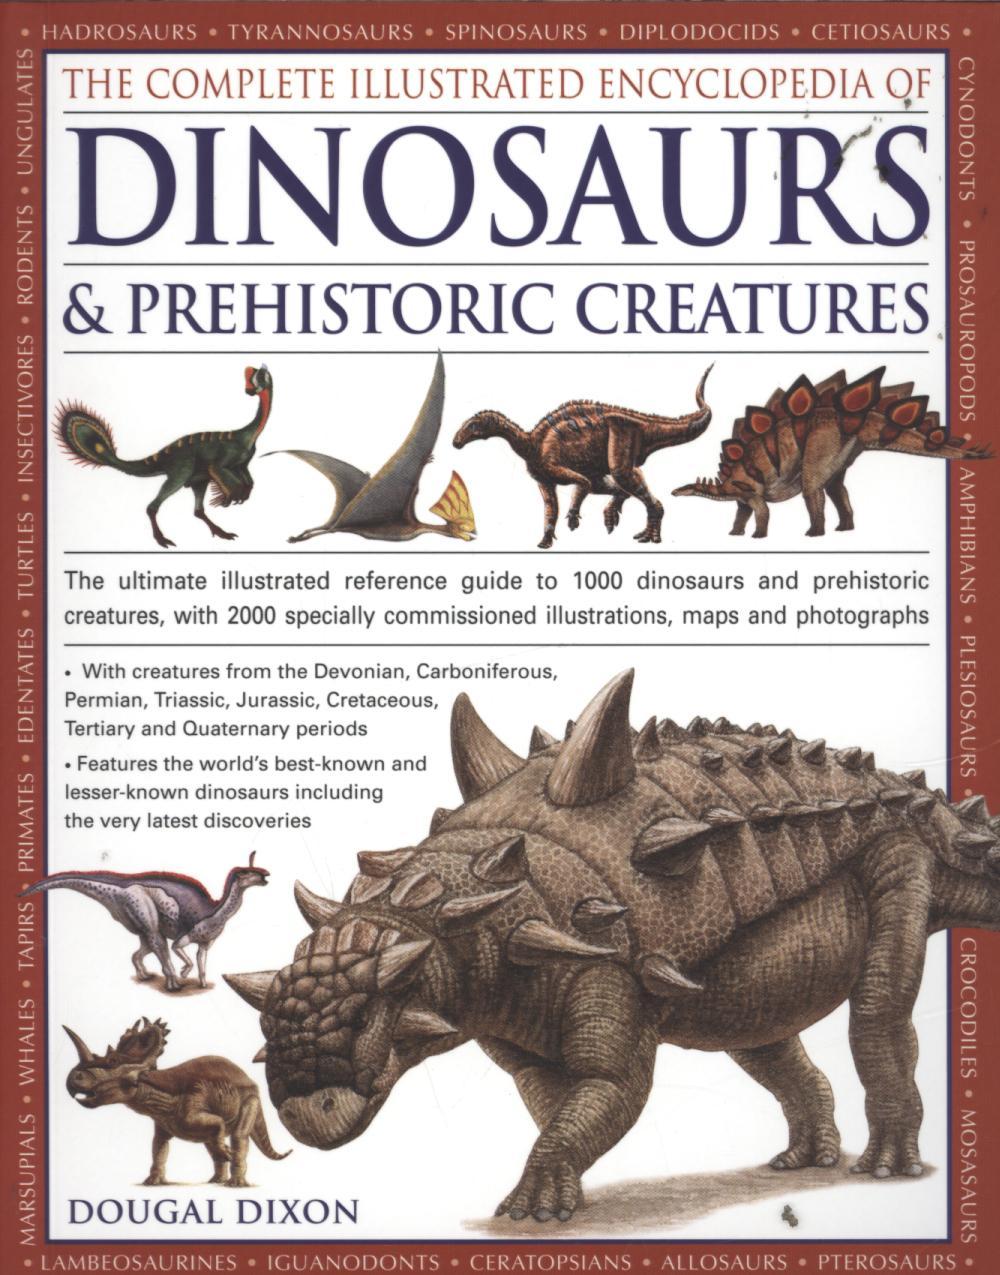 Complete Illustrated Encyclopedia of Dinosaurs & Prehistoric